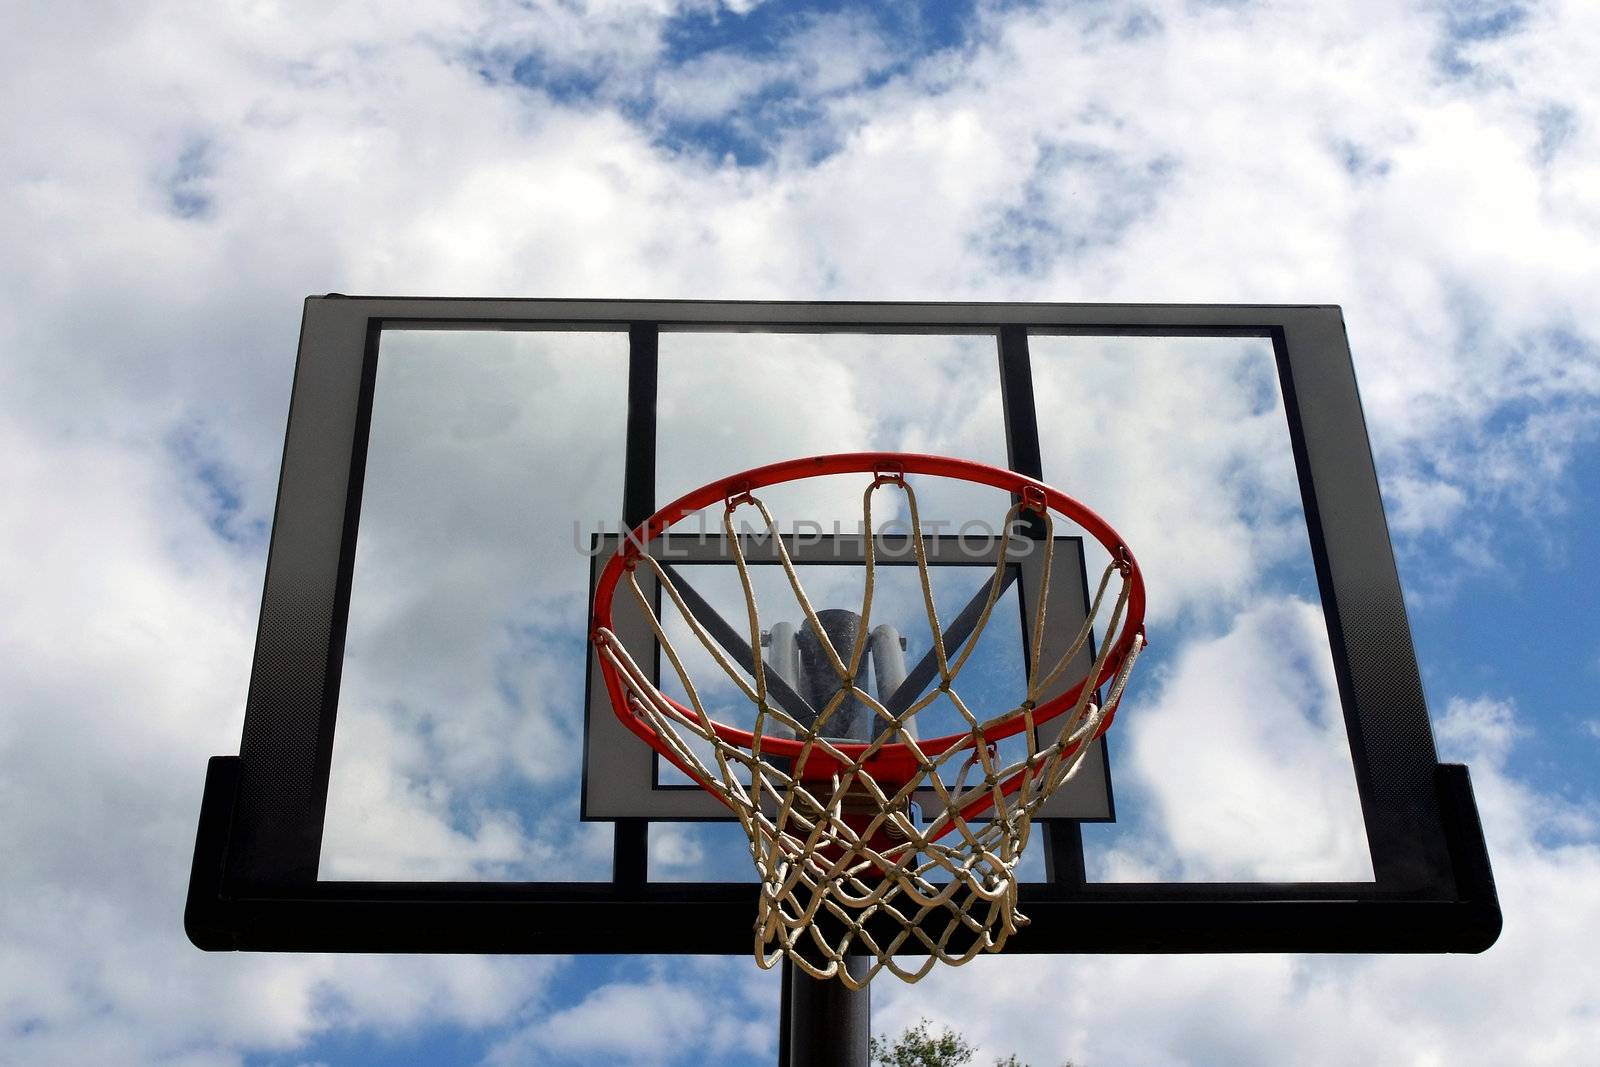 An outdoor basketball net with blue sky background